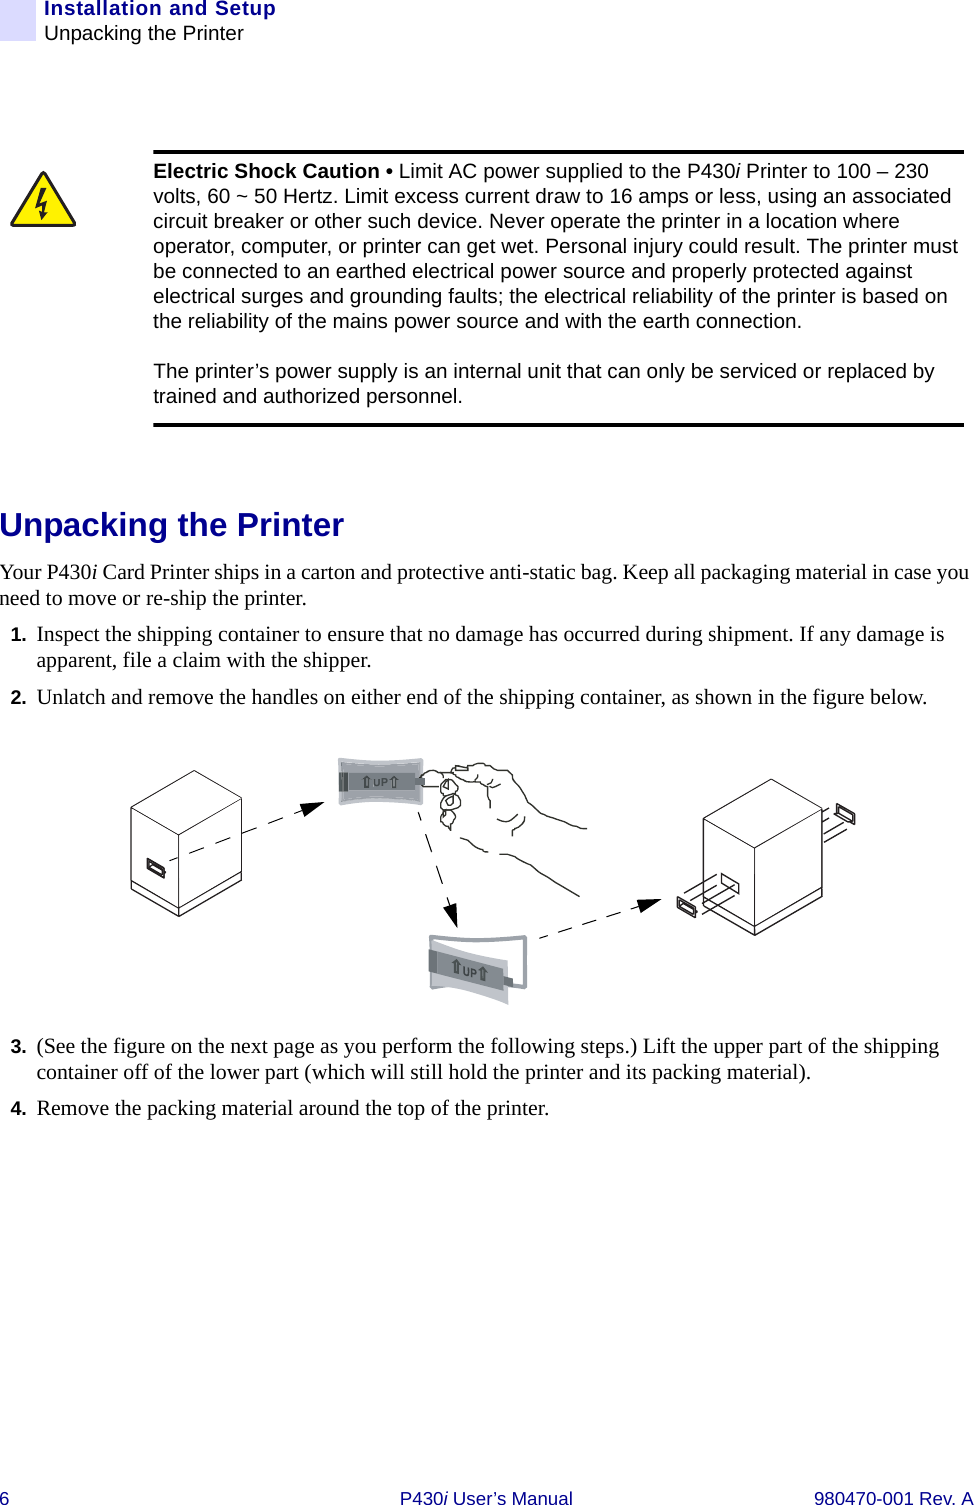 6 P430i User’s Manual 980470-001 Rev. AInstallation and SetupUnpacking the PrinterUnpacking the PrinterYour P430i Card Printer ships in a carton and protective anti-static bag. Keep all packaging material in case you need to move or re-ship the printer.1. Inspect the shipping container to ensure that no damage has occurred during shipment. If any damage is apparent, file a claim with the shipper.2. Unlatch and remove the handles on either end of the shipping container, as shown in the figure below.3. (See the figure on the next page as you perform the following steps.) Lift the upper part of the shipping container off of the lower part (which will still hold the printer and its packing material).4. Remove the packing material around the top of the printer.Electric Shock Caution • Limit AC power supplied to the P430i Printer to 100 – 230 volts, 60 ~ 50 Hertz. Limit excess current draw to 16 amps or less, using an associated circuit breaker or other such device. Never operate the printer in a location where operator, computer, or printer can get wet. Personal injury could result. The printer must be connected to an earthed electrical power source and properly protected against electrical surges and grounding faults; the electrical reliability of the printer is based on the reliability of the mains power source and with the earth connection.The printer’s power supply is an internal unit that can only be serviced or replaced by trained and authorized personnel.UP